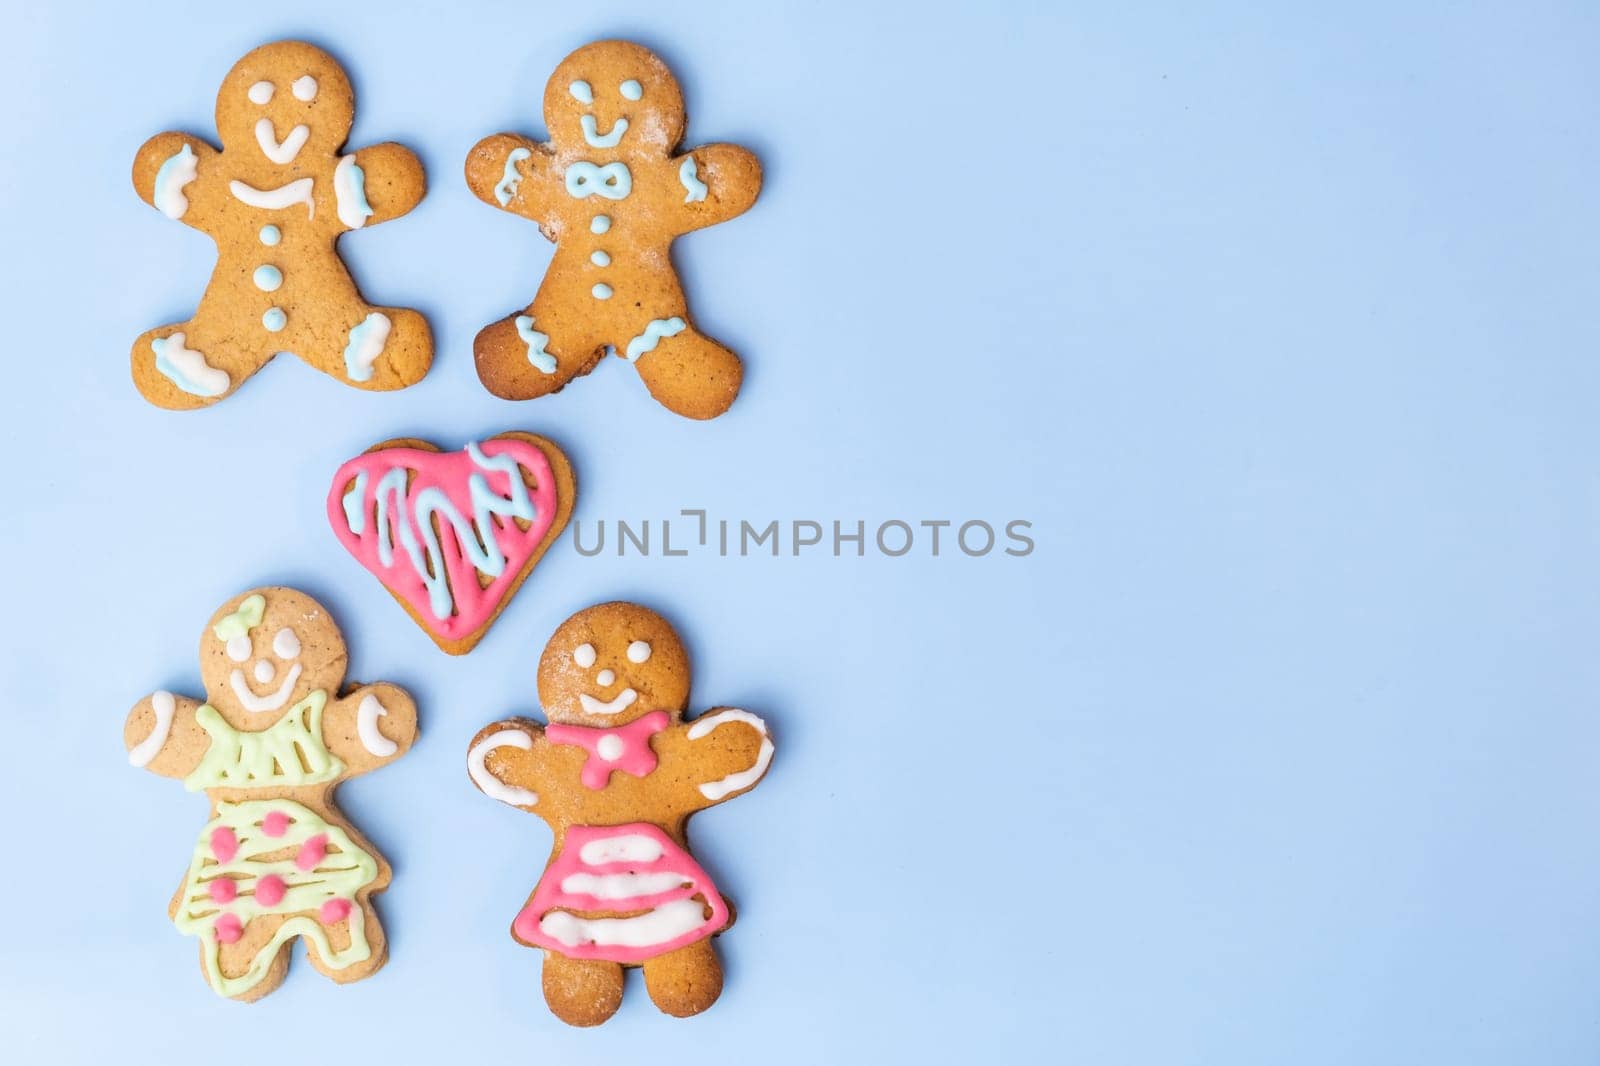 Homosexual couple cookies or gingerbreads and heart with colorful icing for St Valentines Day on the blue background with copy space by vladimka